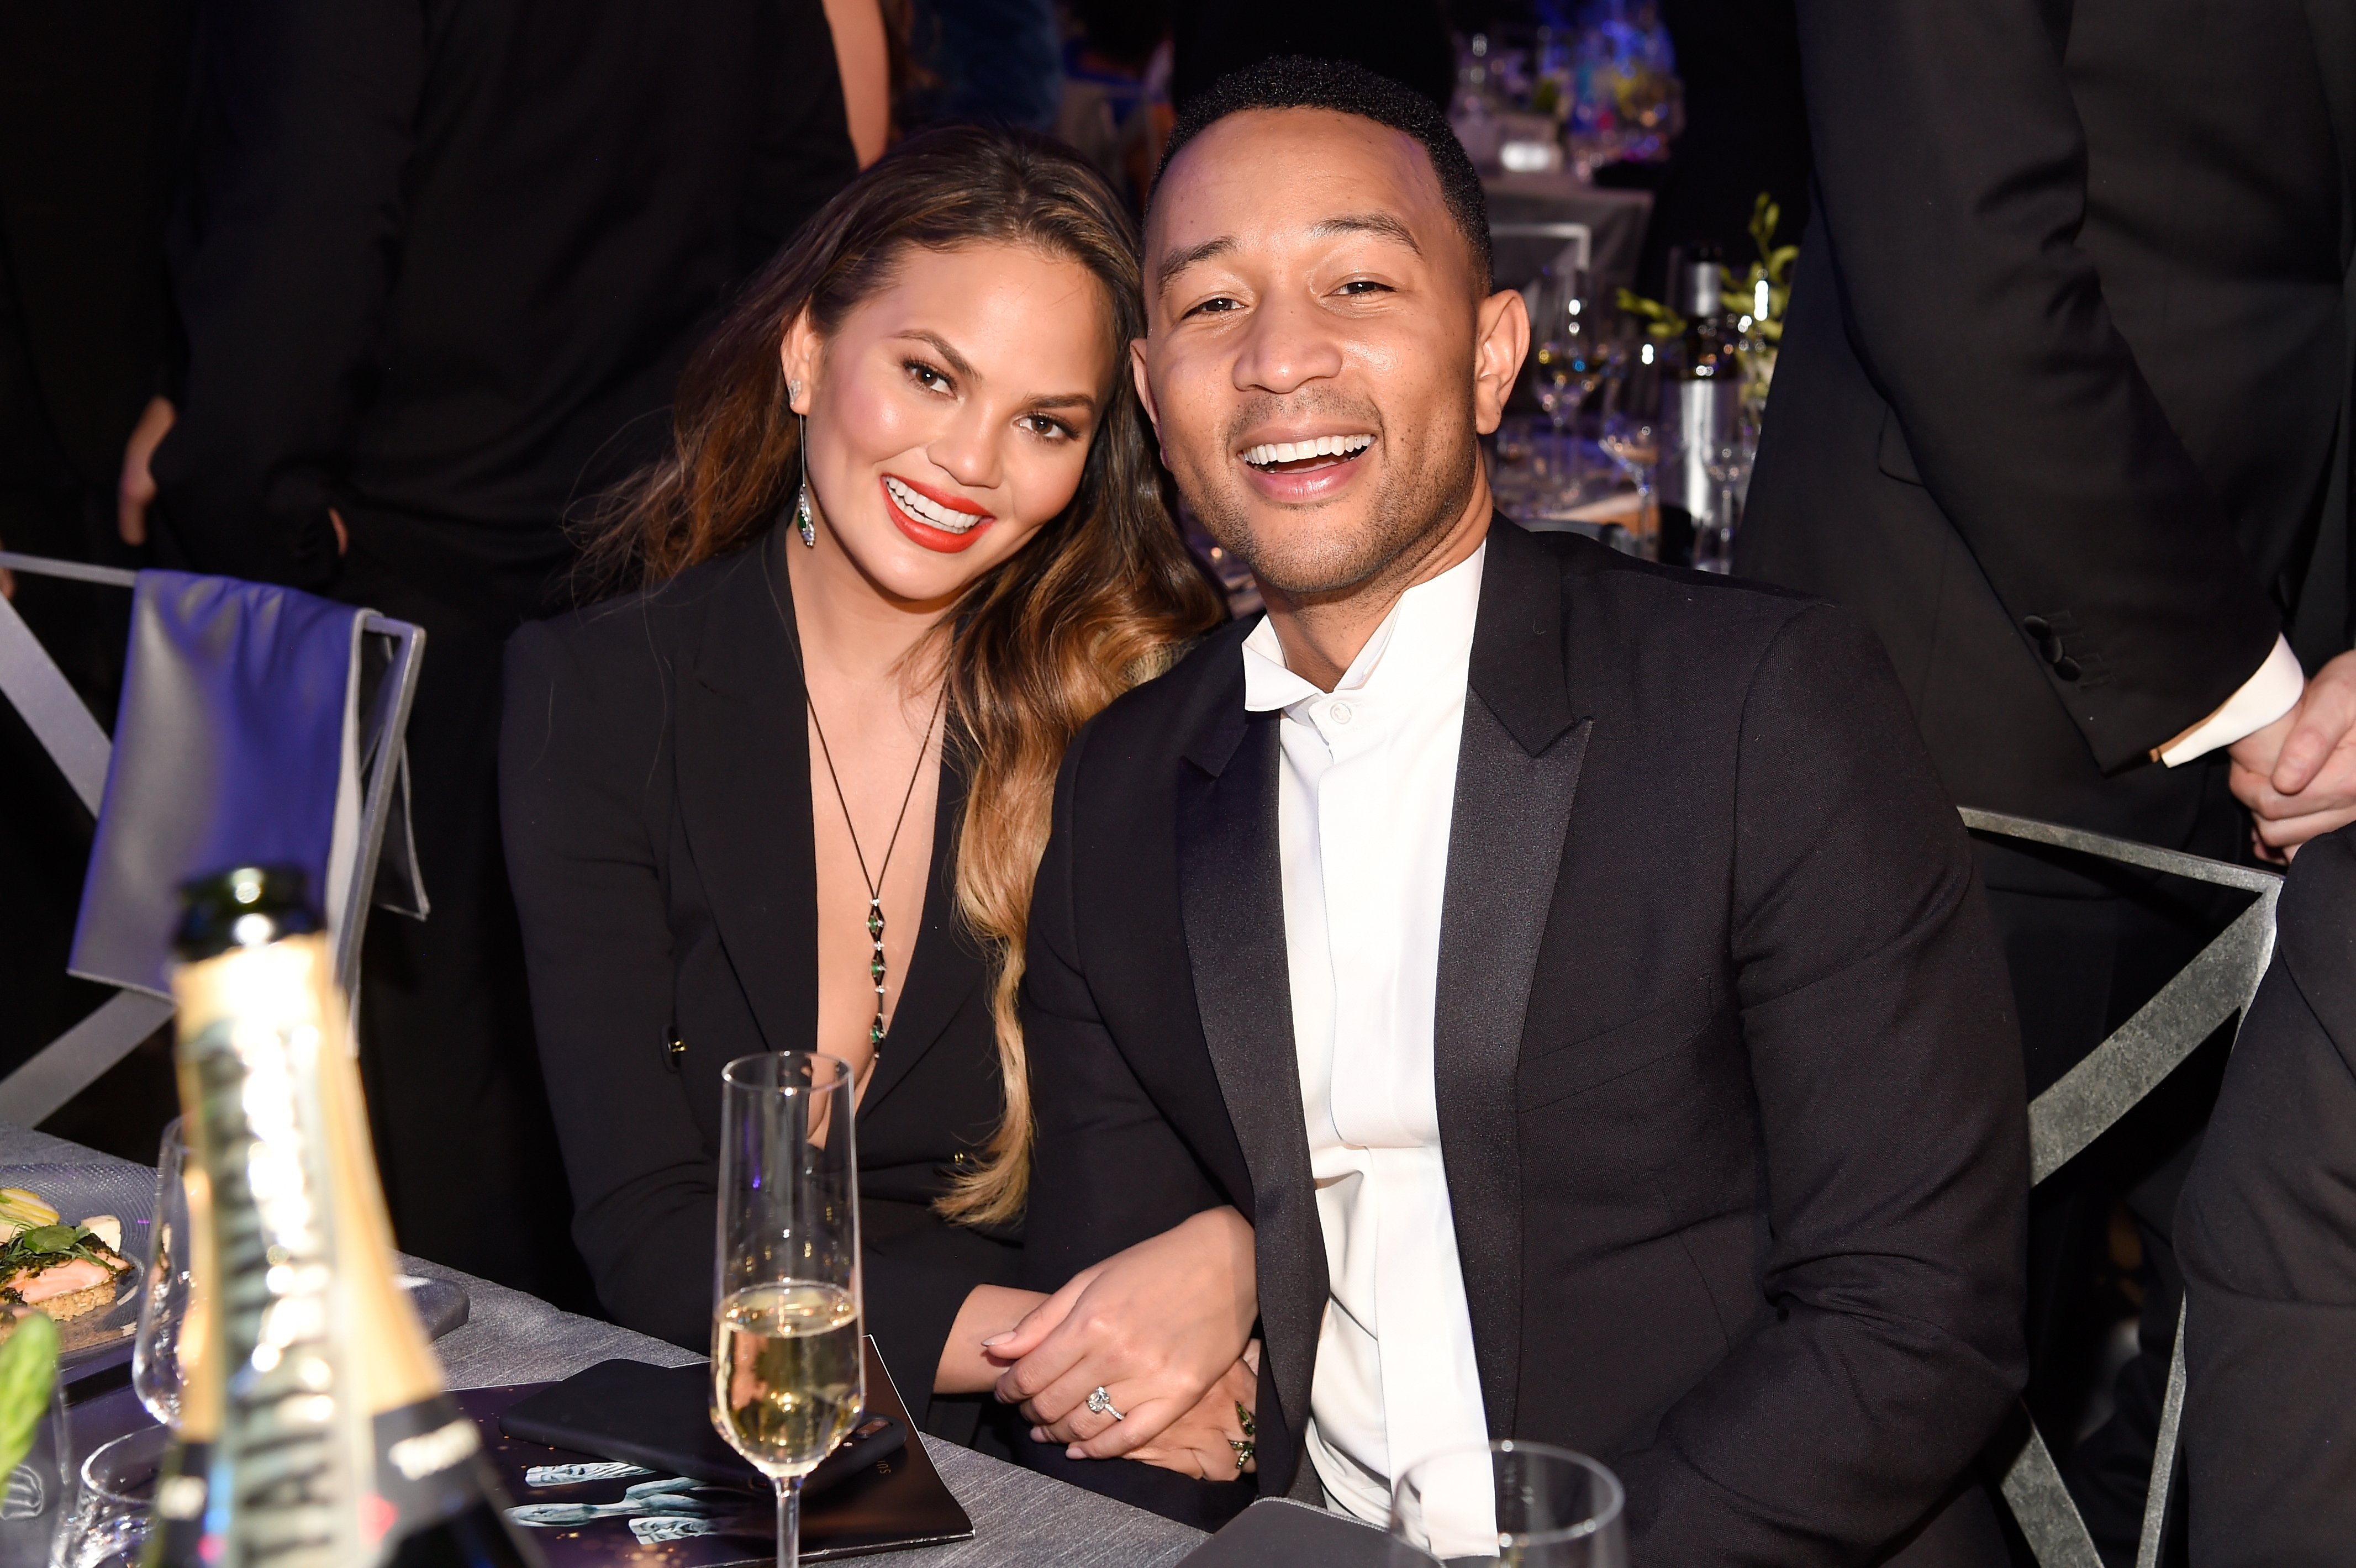 Chrissy Teigen and John Legend during The 23rd Annual Screen Actors Guild Awards in January 2017 | Photo: Getty Images